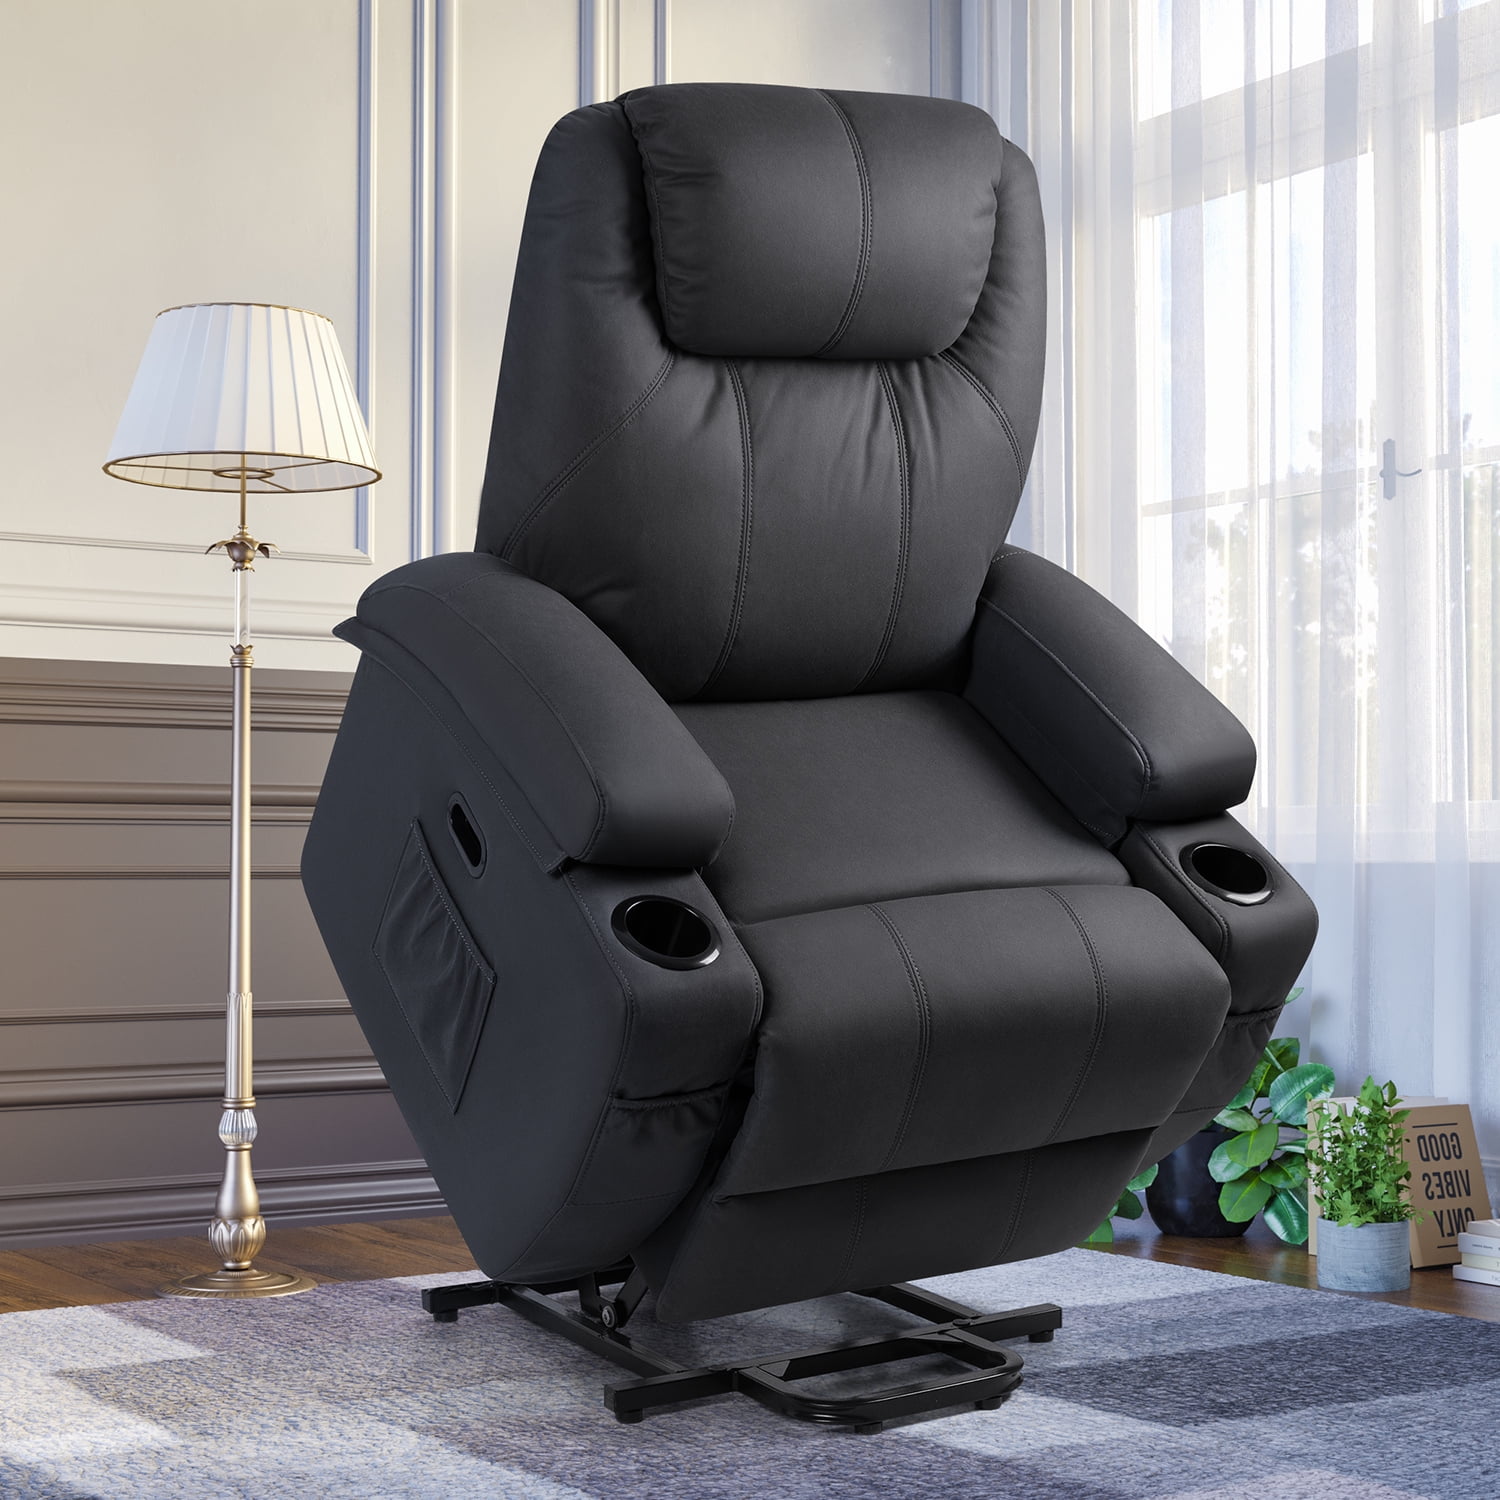 Homall Electric Power Lift Recliner Chair PU Leather for Elderly with  Massage and Heating Ergonomic Lounge